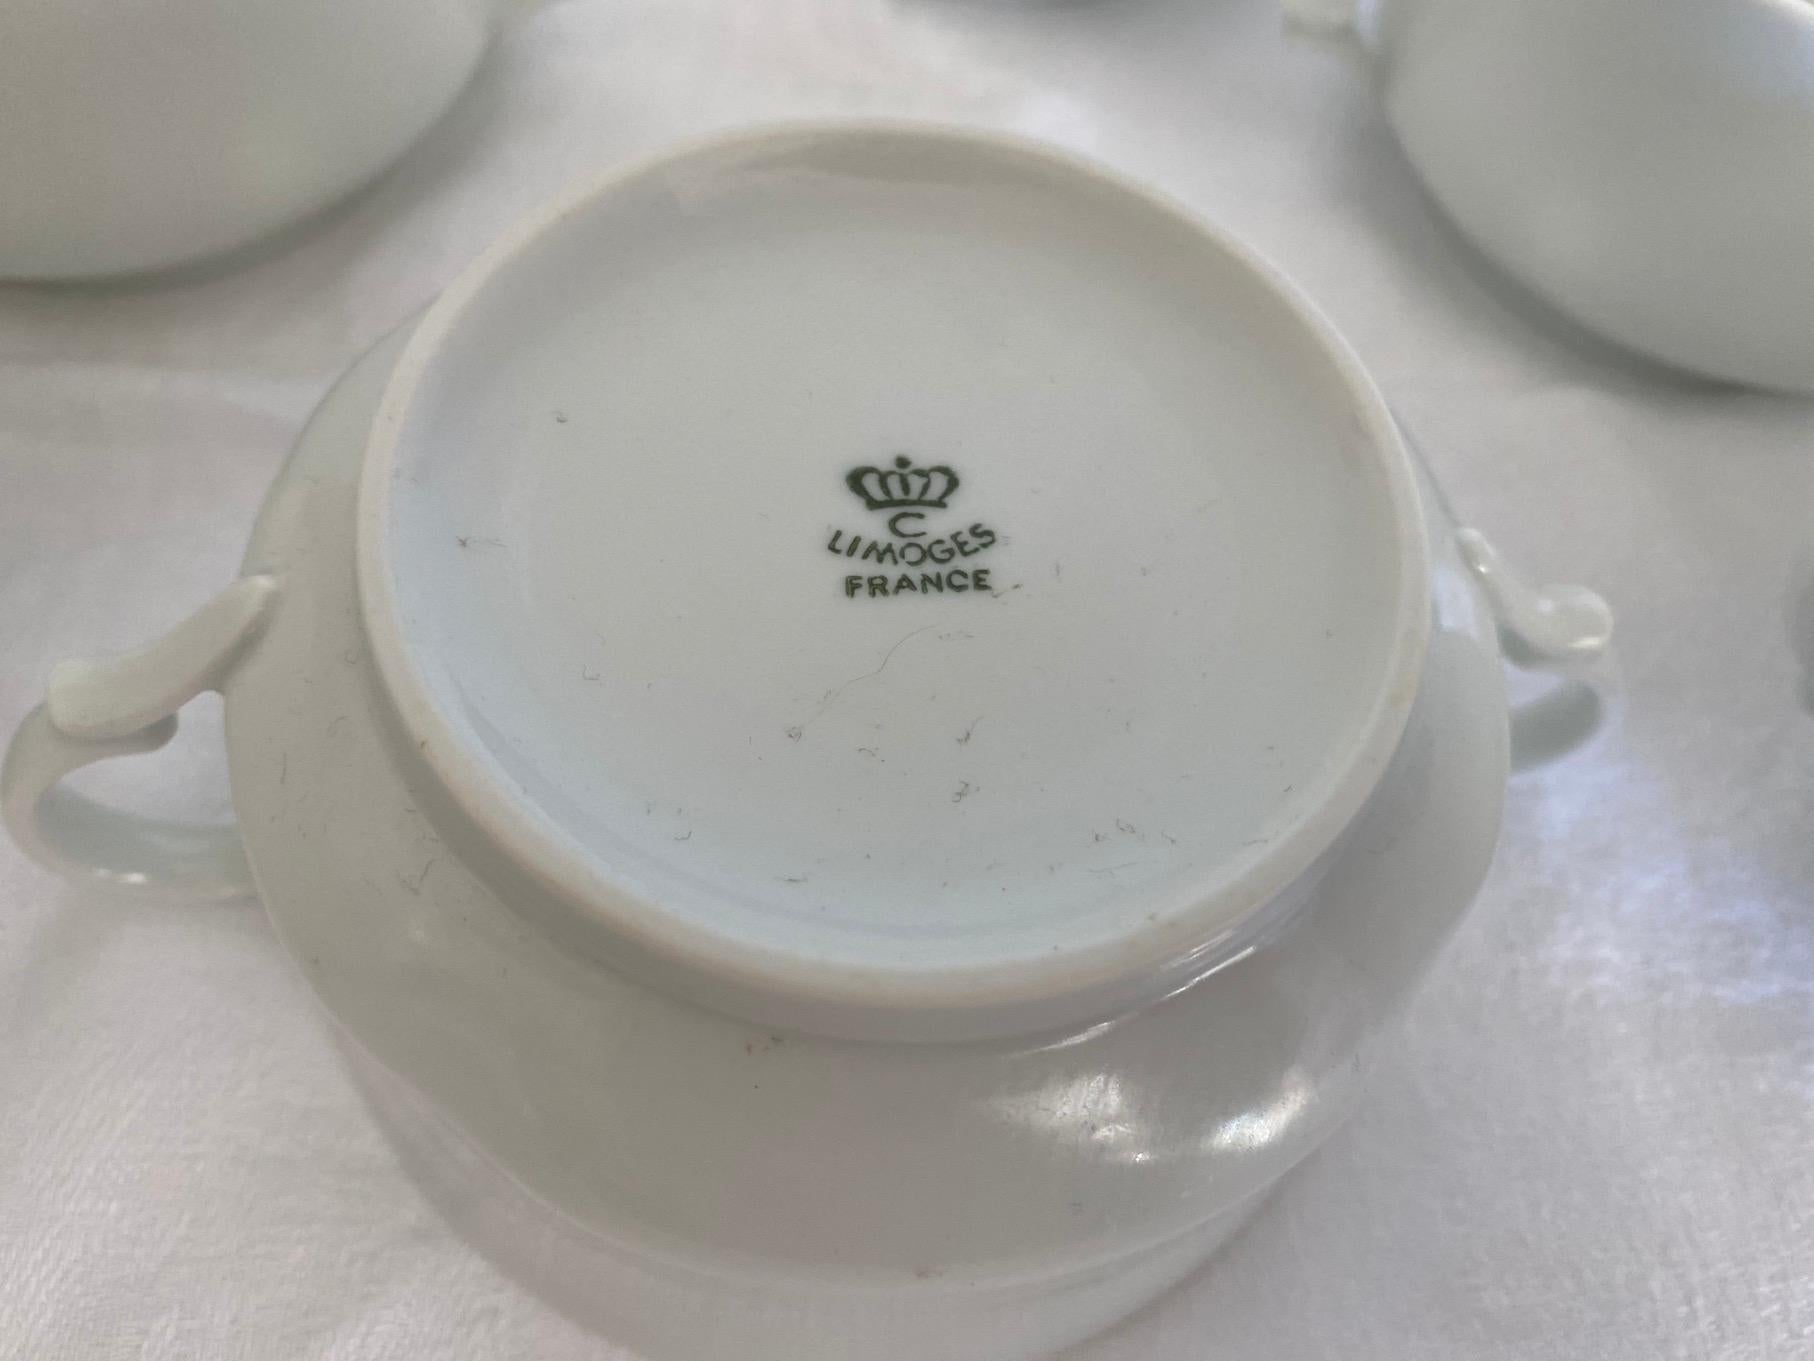 11 Limoges France Consommé or Soup Cup, Sold Singly 2